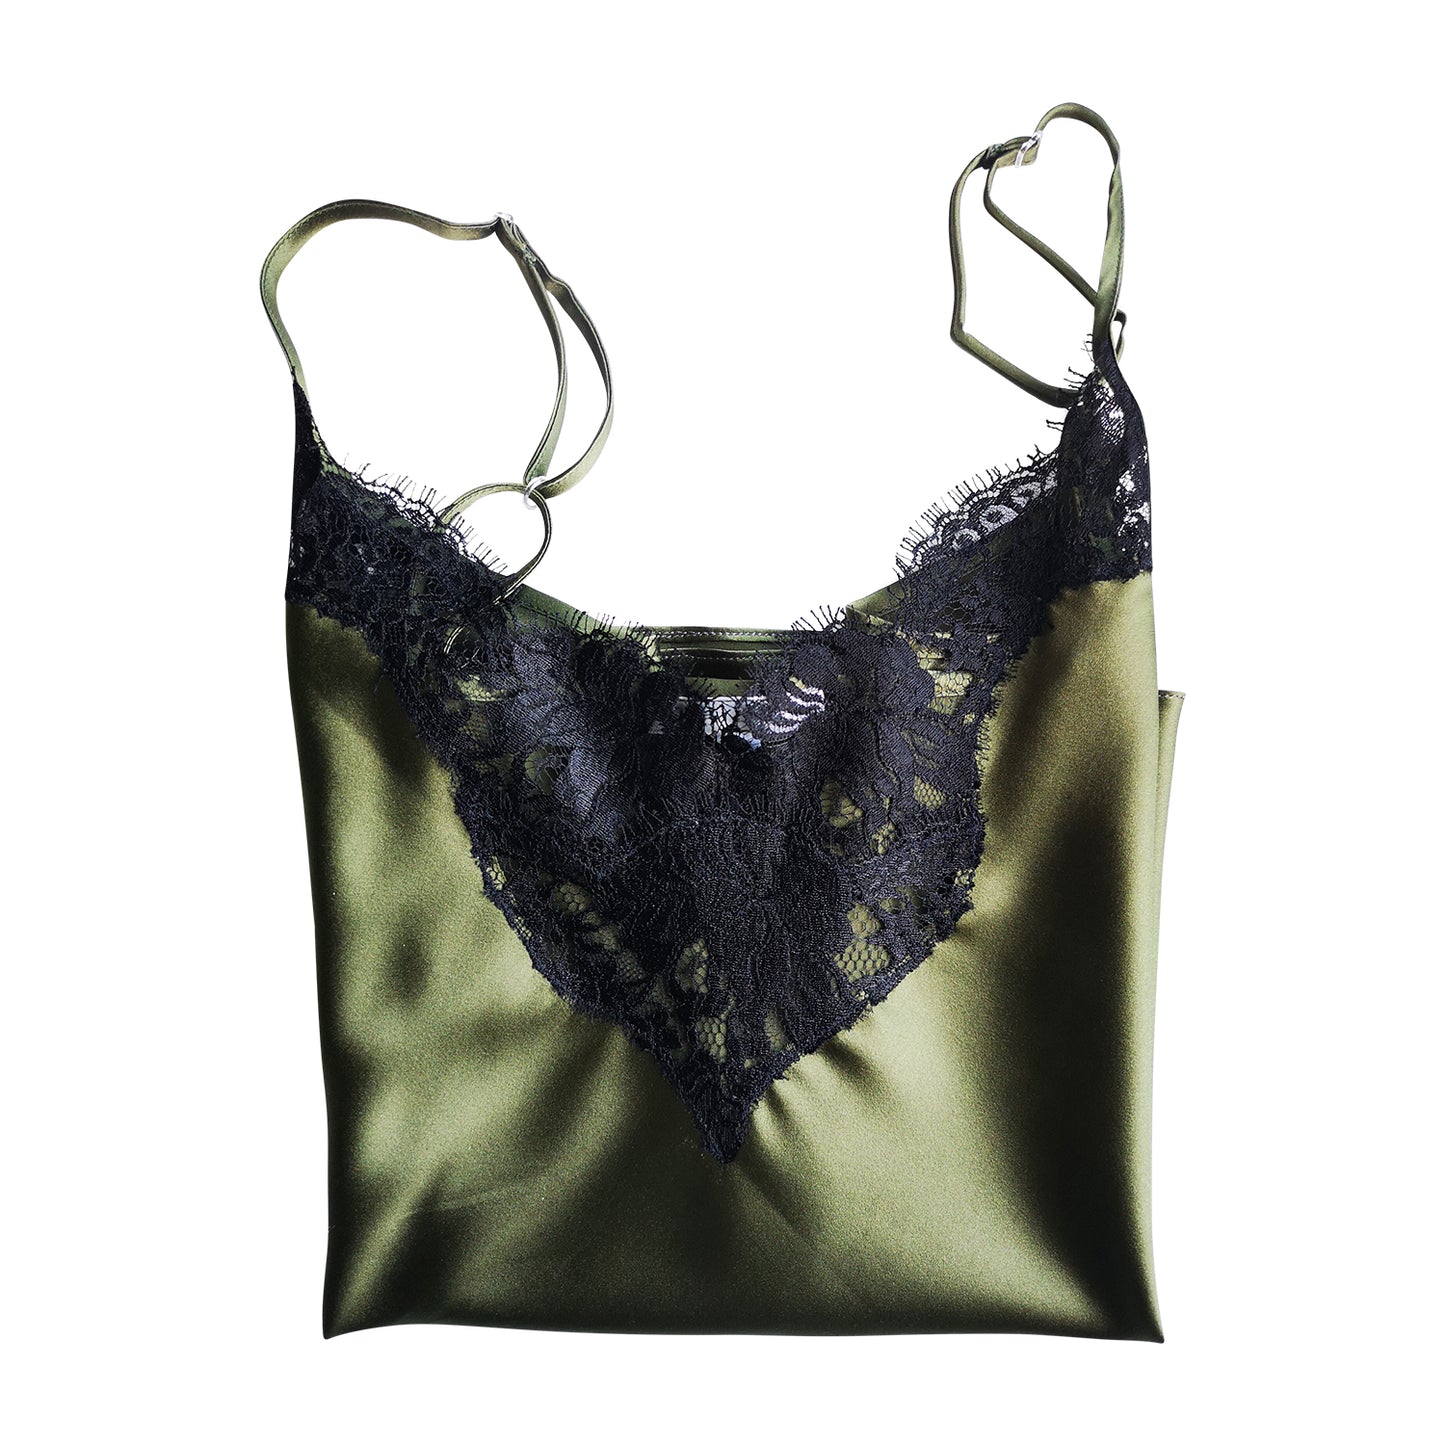 Khaki silk camisole with scalloped French lace